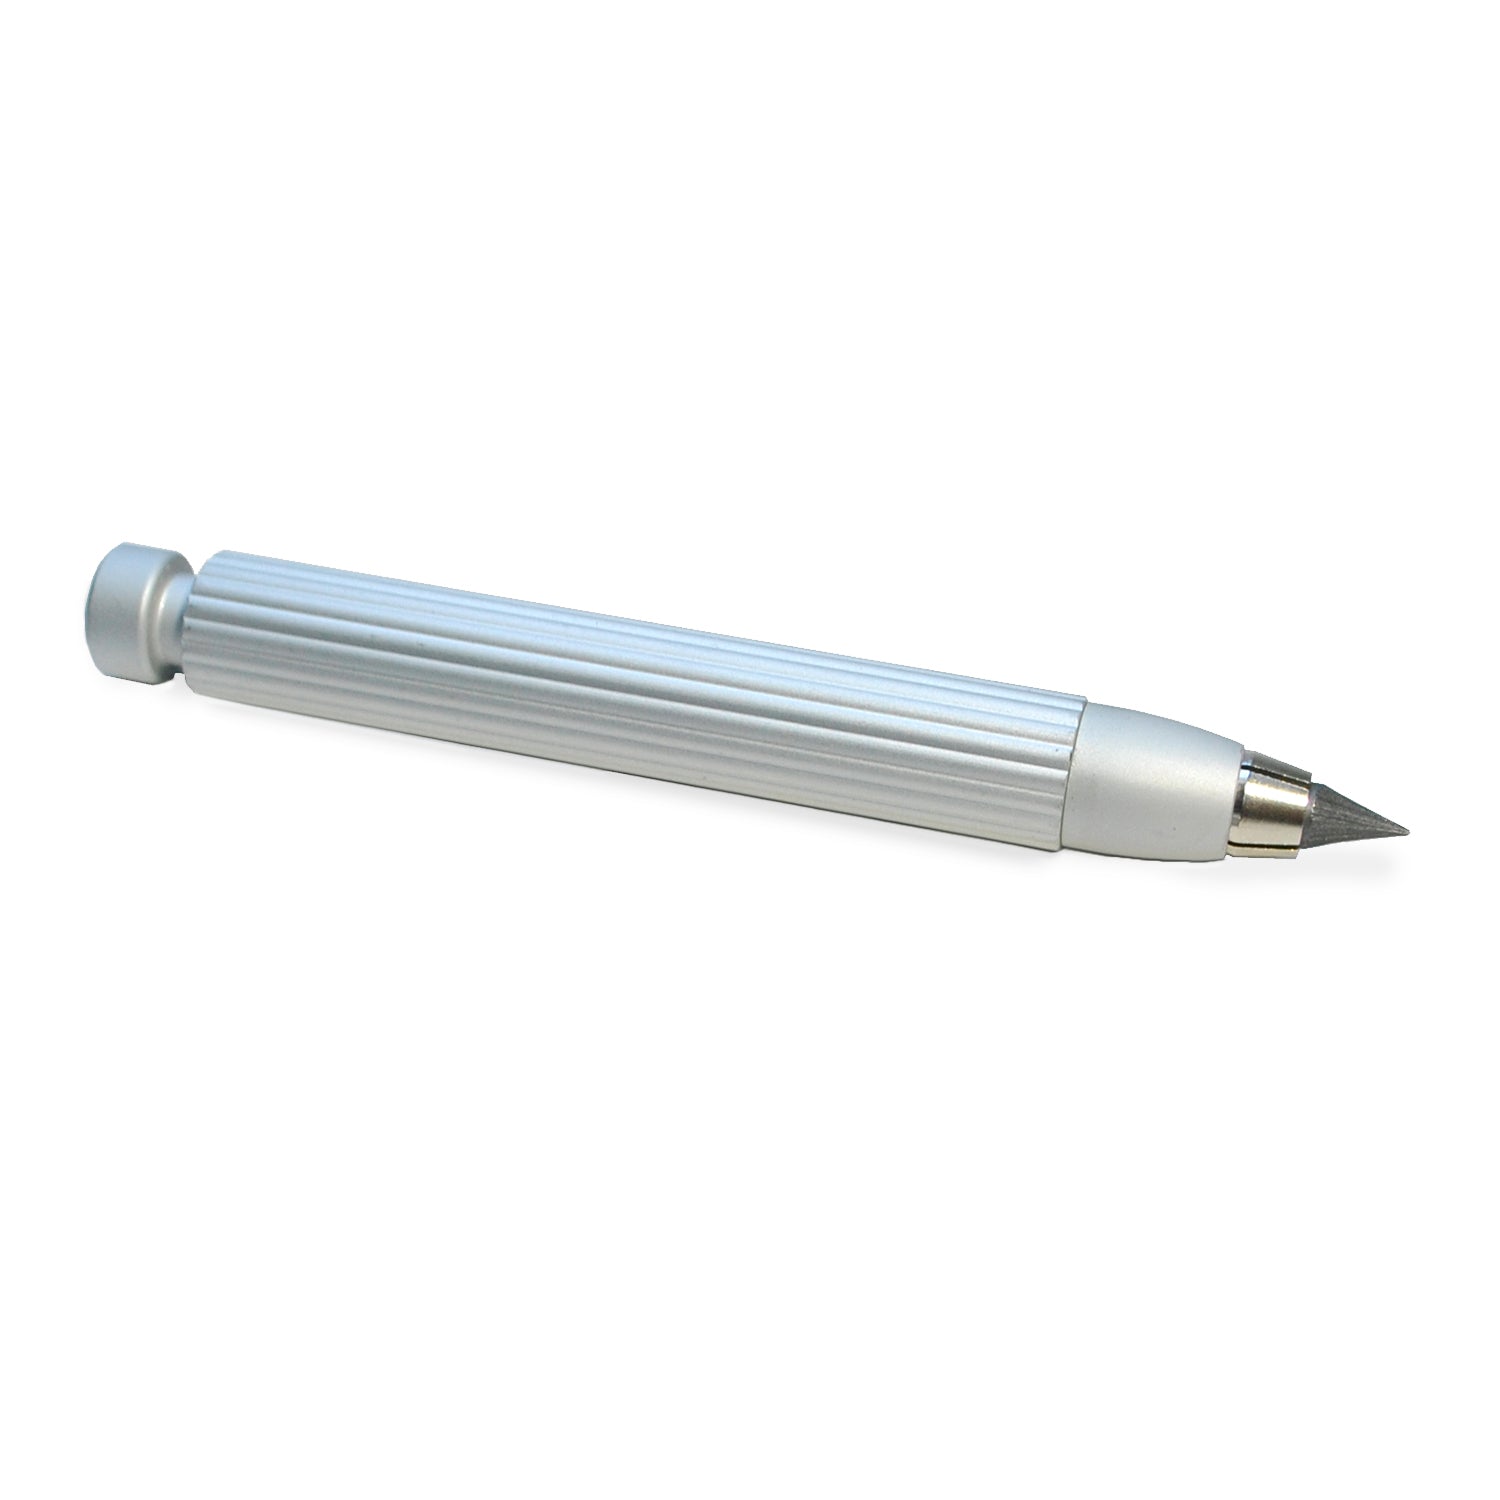 Worther Profil 5.6mm Mechanical Pencil- Natural